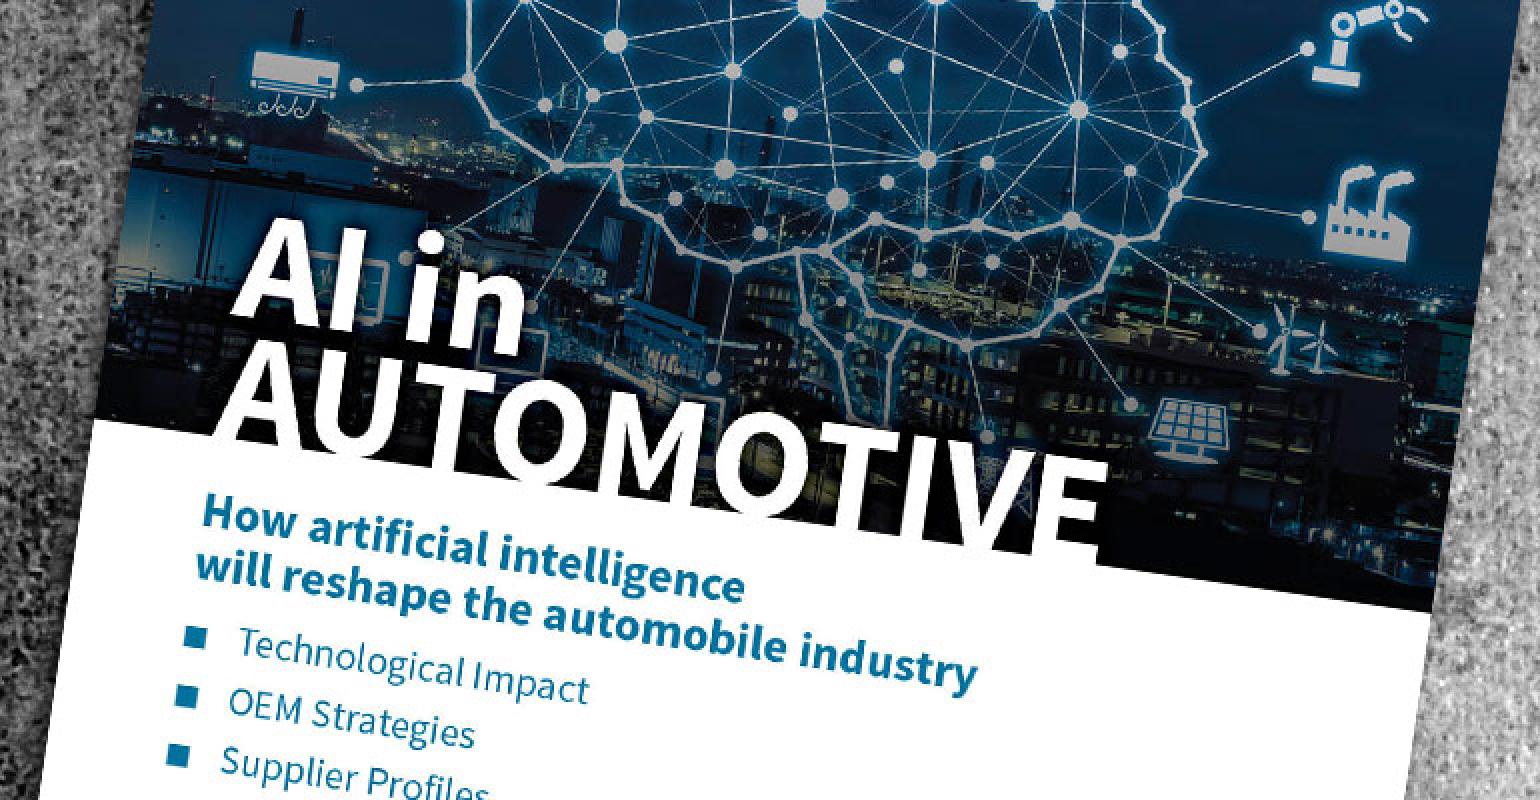 How is AI impacting the Automobile Industry?